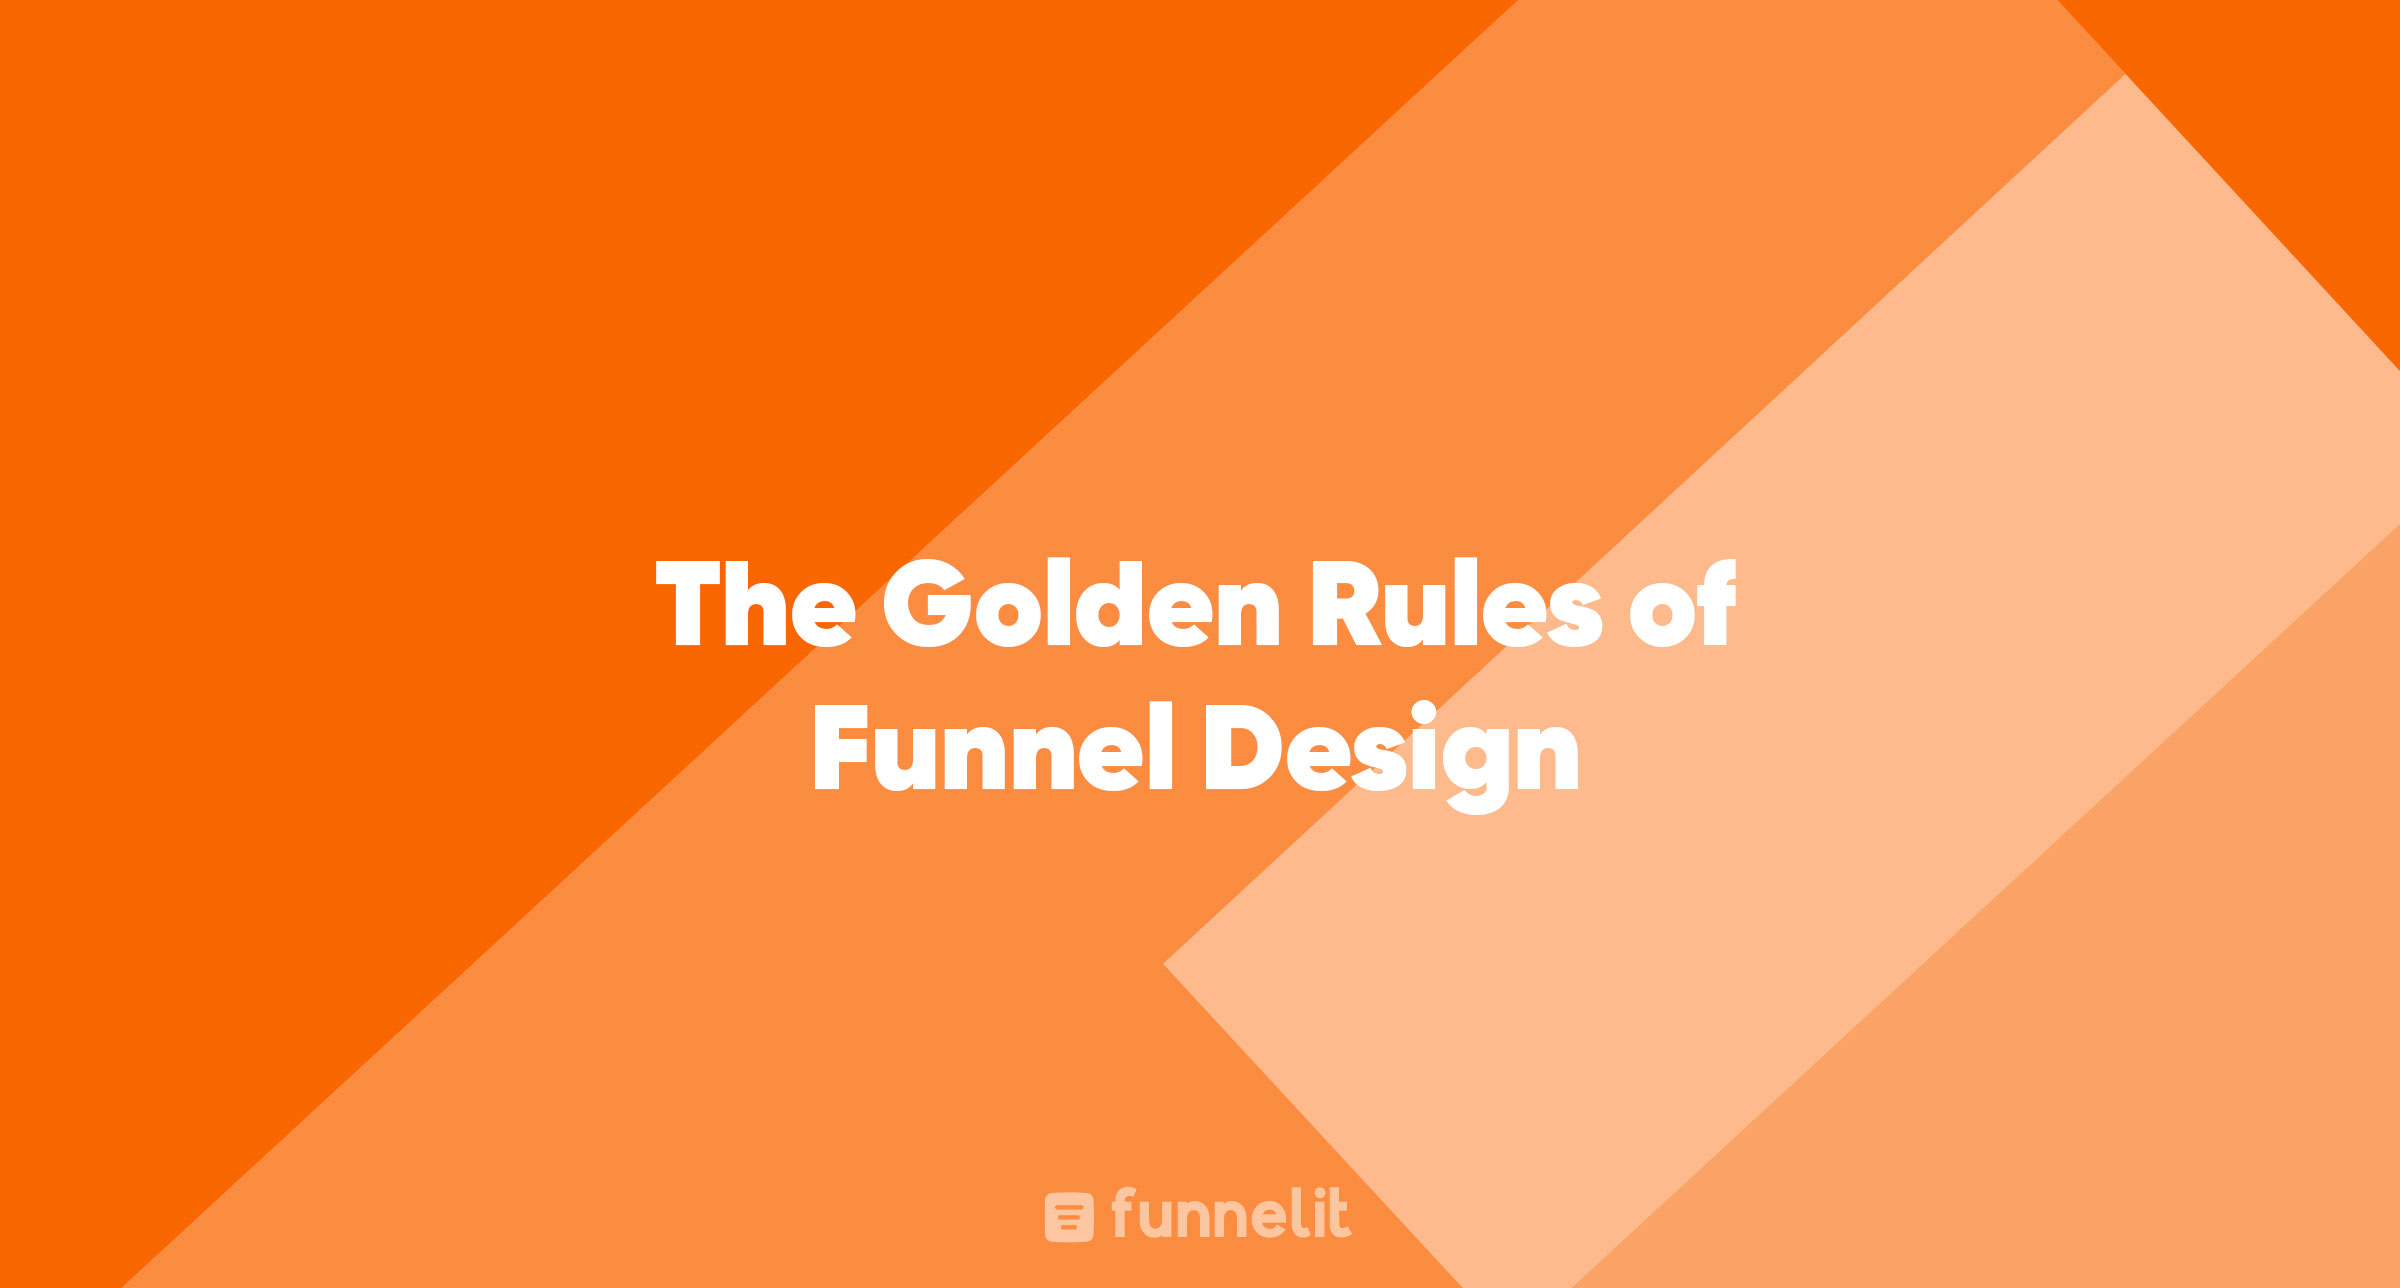 Article | The Golden Rules of Funnel Design